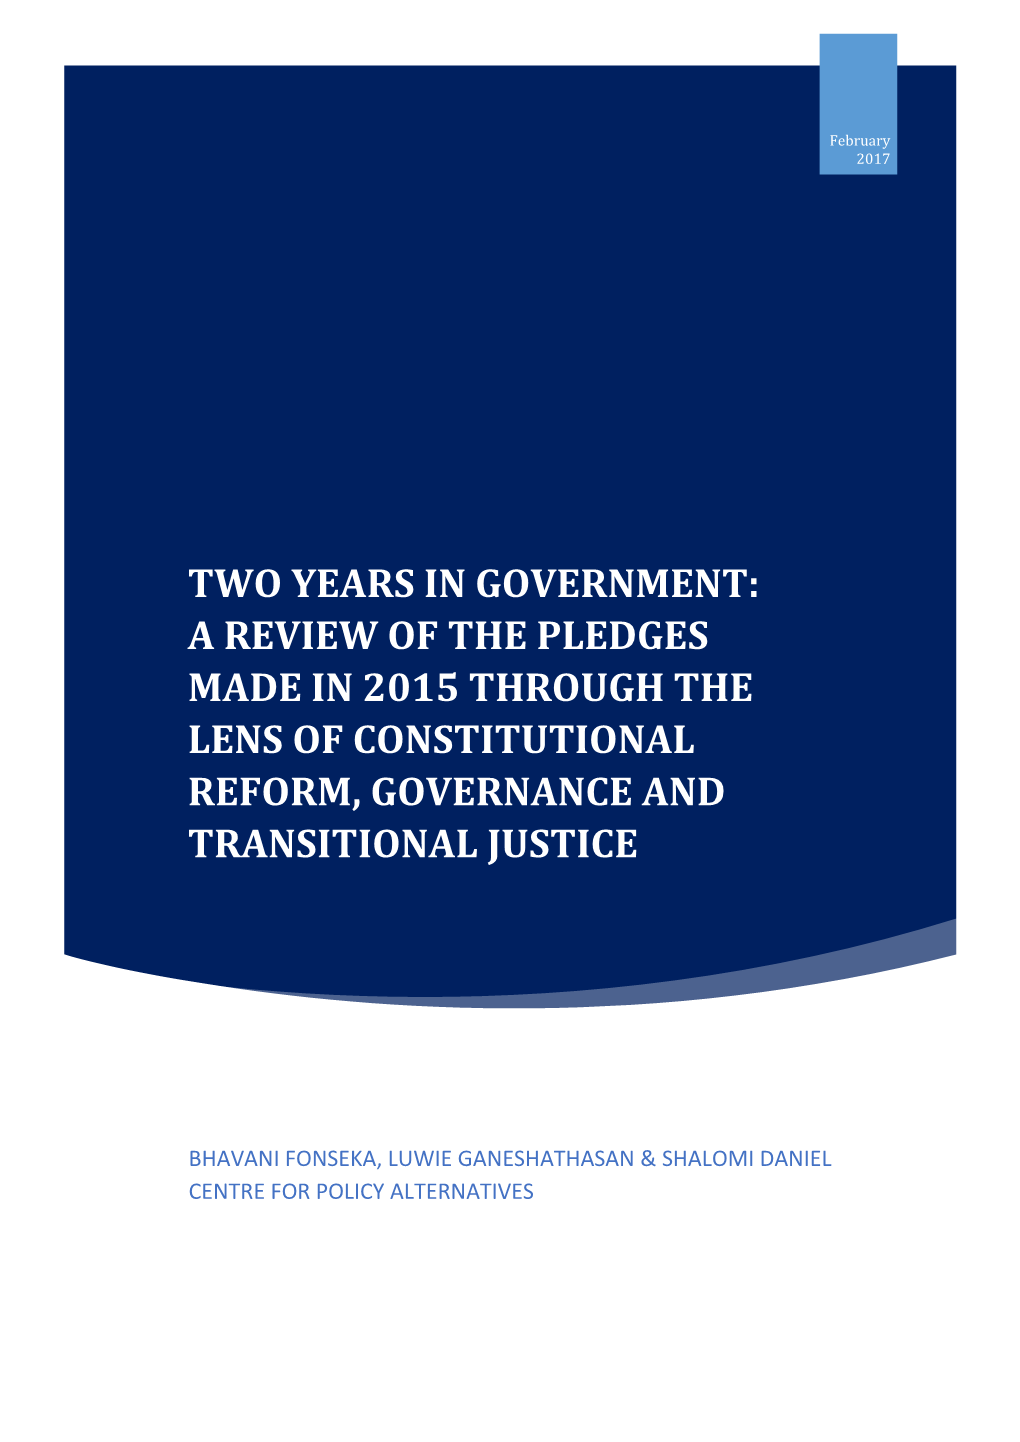 Two Years in Government: a Review of the Pledges Made in 2015 Through the Lens of Constitutional Reform, Governance and Transitional Justice